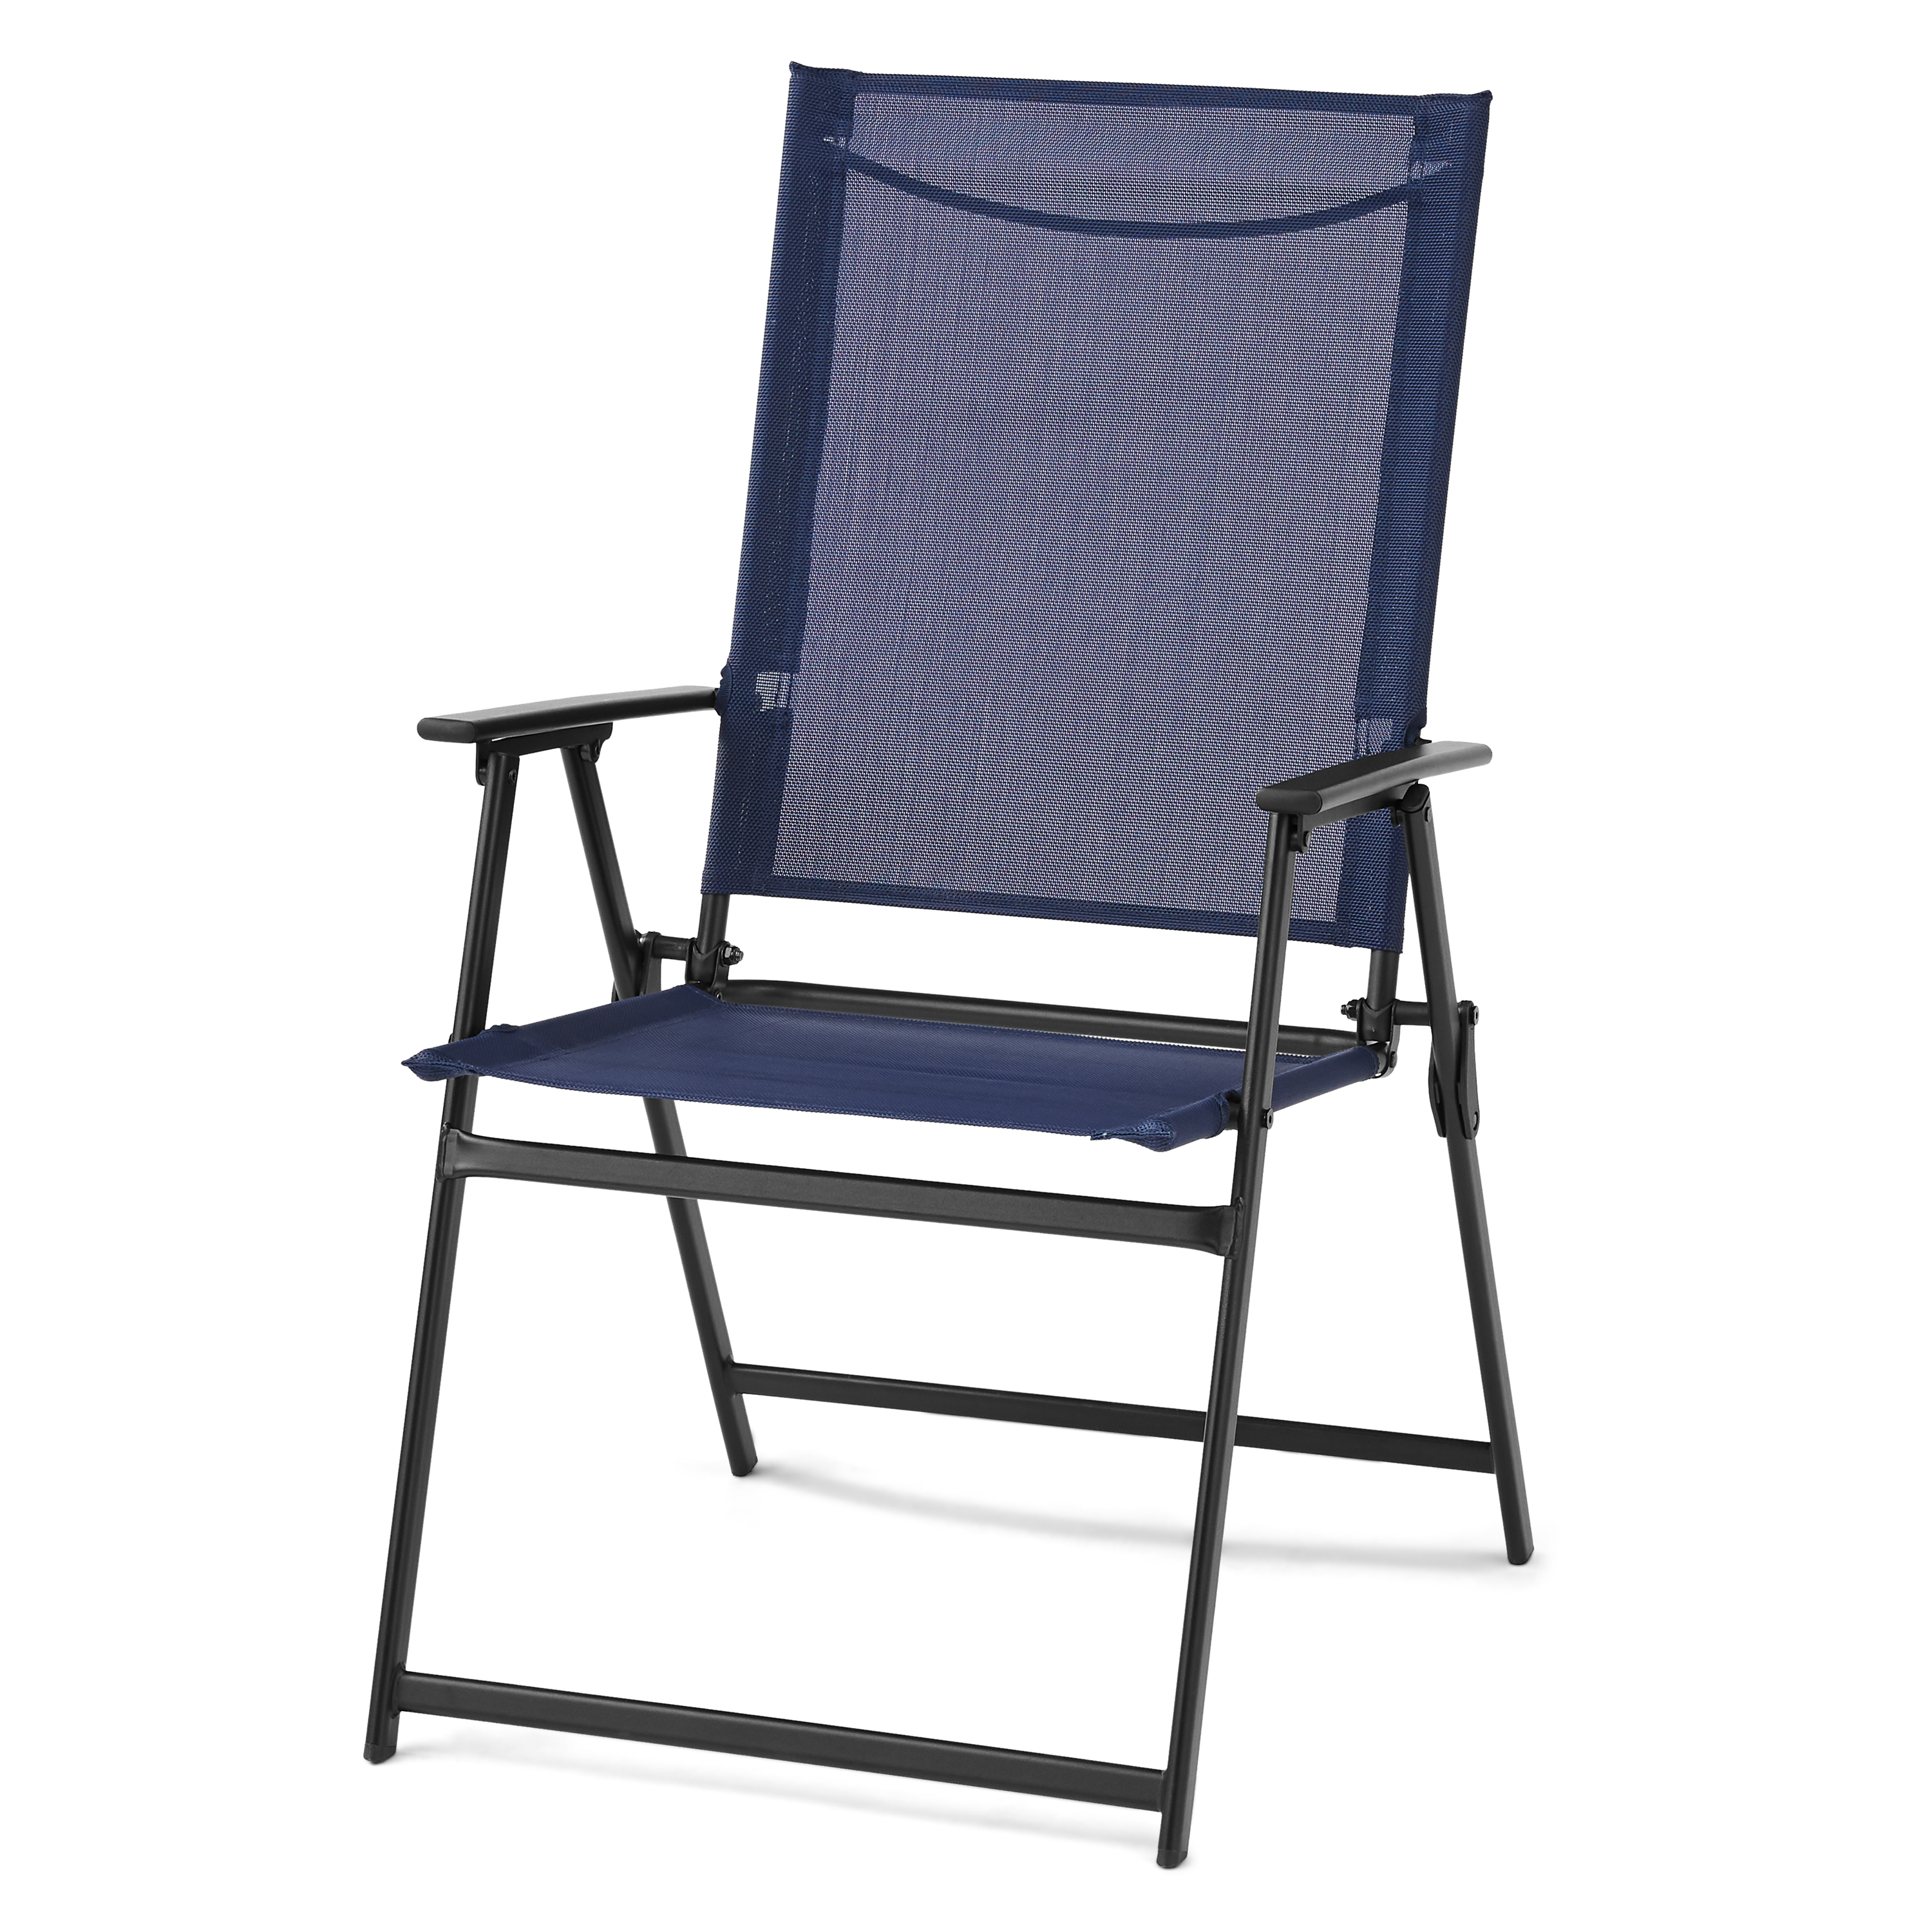 Mainstays Greyson Steel and Sling Adult Folding Outdoor Patio Armchair, Navy (Set of 2) - image 2 of 8